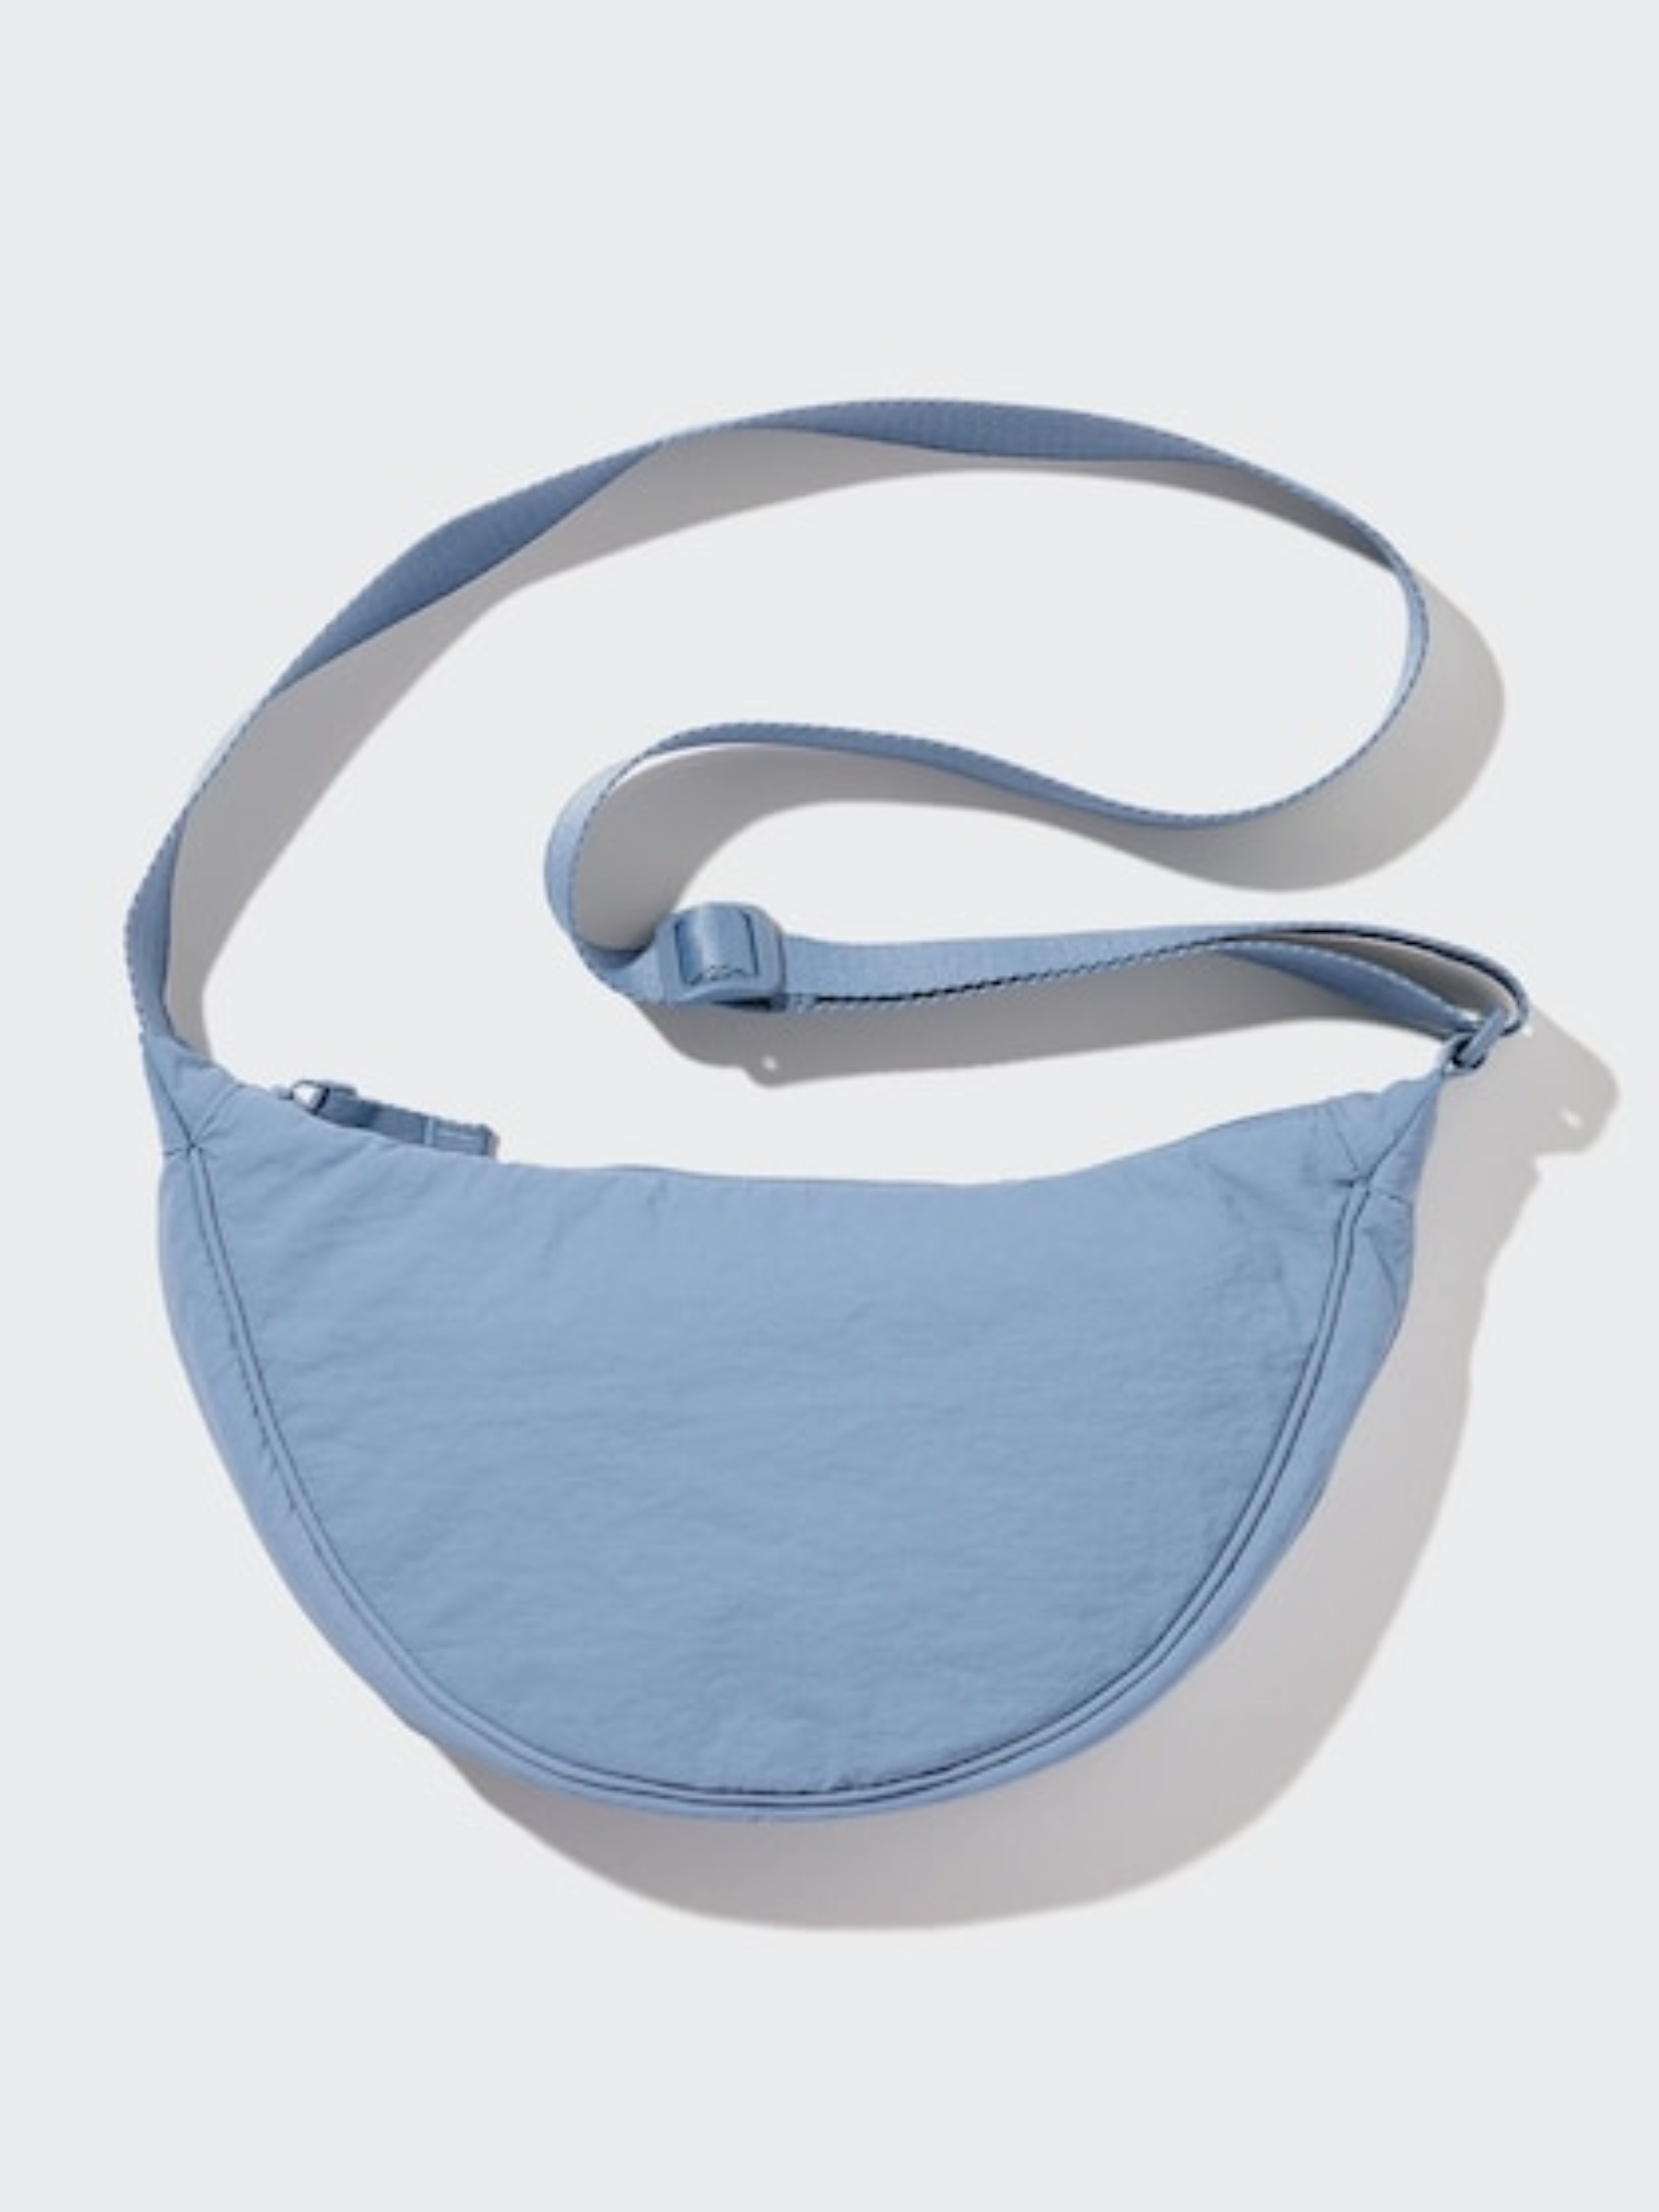 A nylon crossbody is perfectly sized to fit all their daily essentials including a phone, a small water bottle, and earbuds. This practical pick is also water-repellant and comes in nine neutral colors. $15, Uniqlo. <a href="https://www.uniqlo.com/us/en/products/E461053-000/00?">Get it now!</a><p>Sign up for today’s biggest stories, from pop culture to politics.</p><a href="https://www.glamour.com/newsletter/news?sourceCode=msnsend">Sign Up</a>